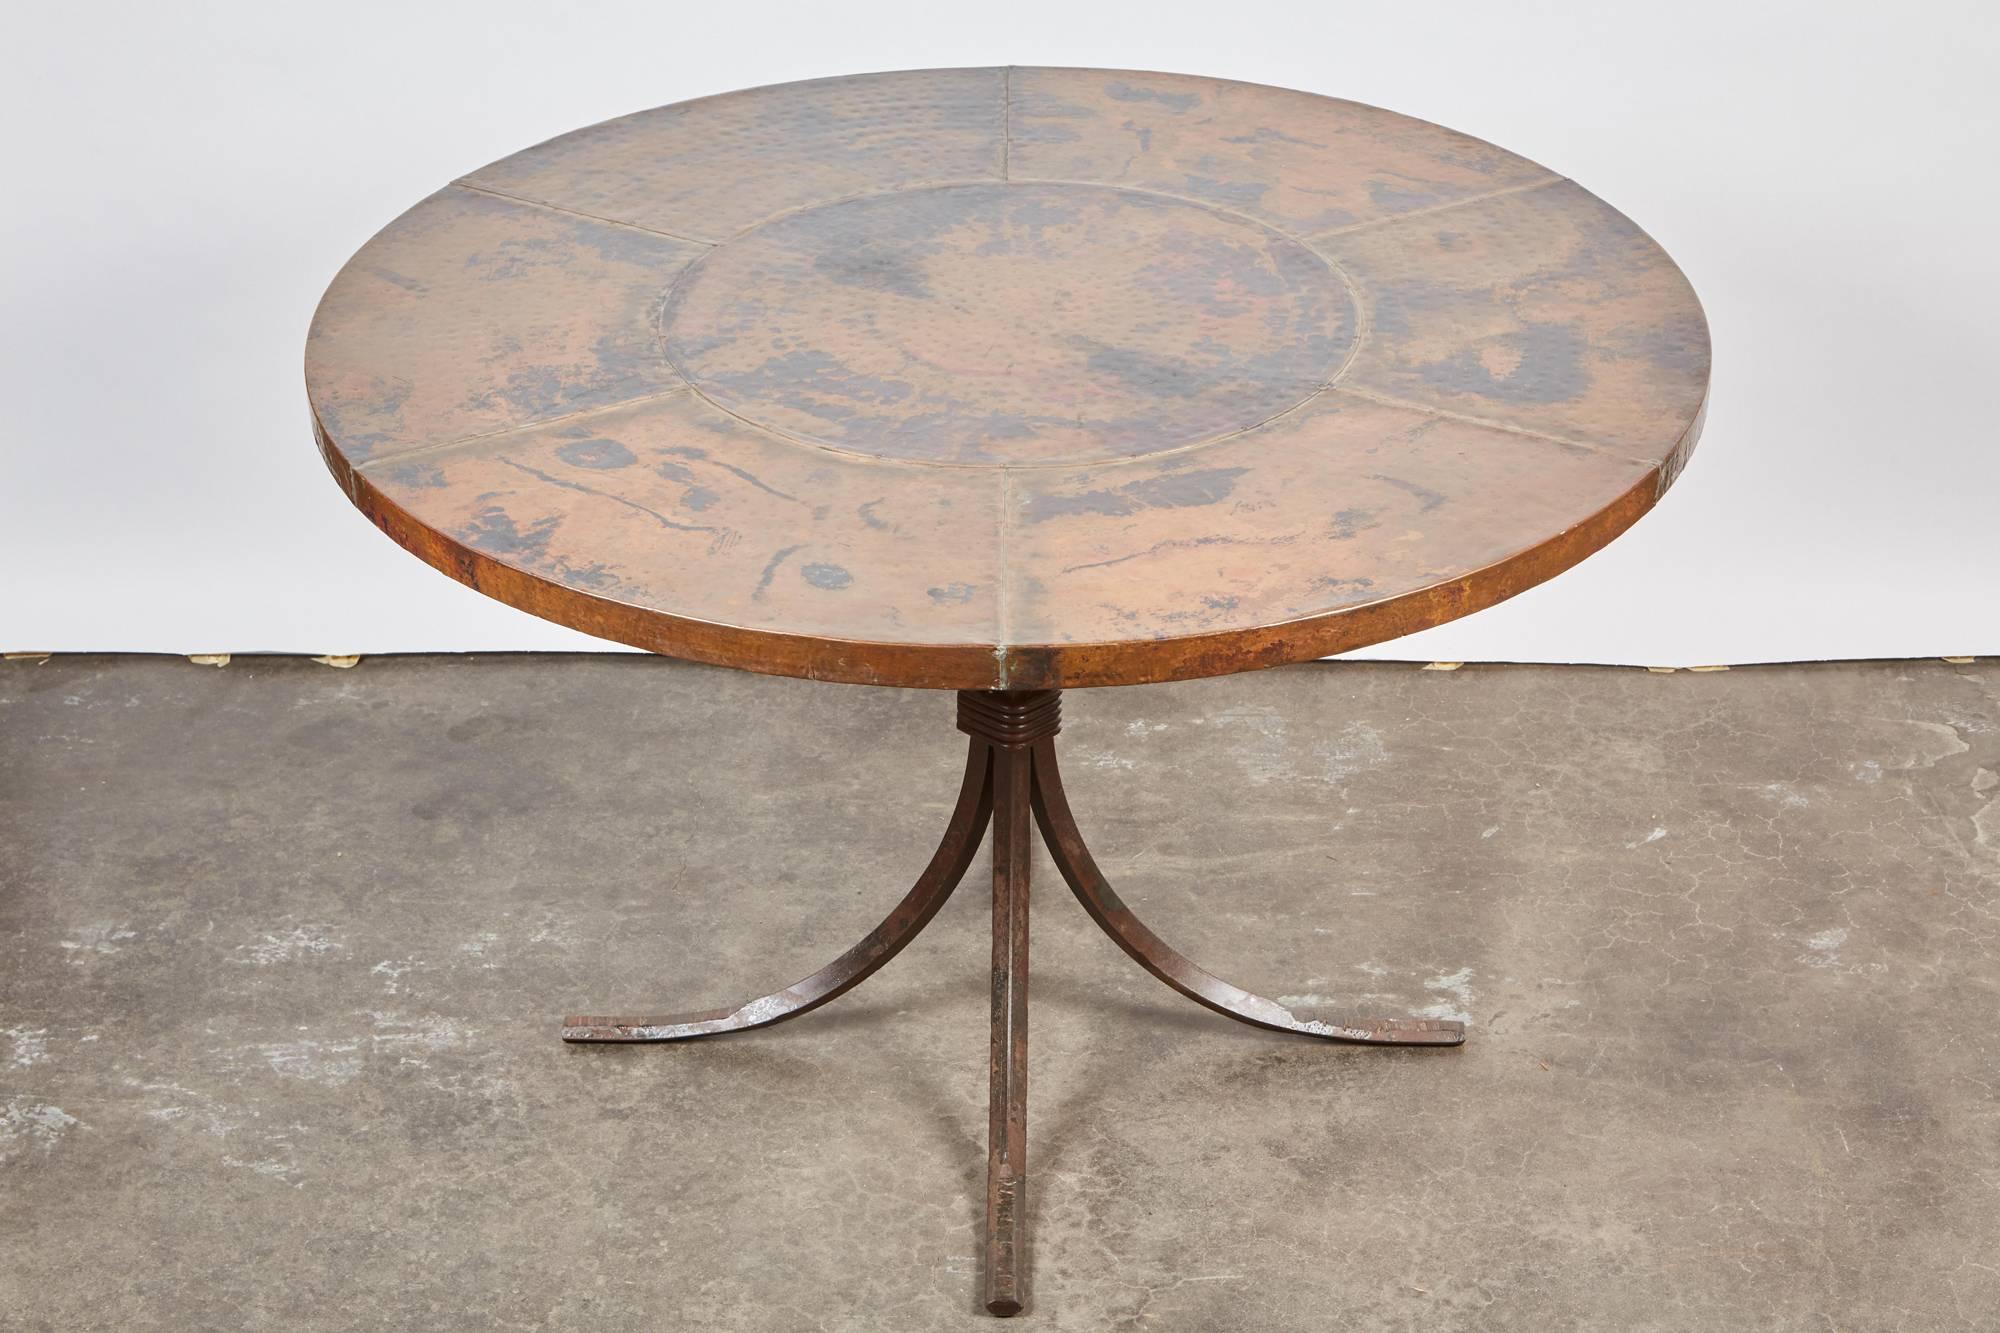 An Indian table that features a rust brown copper tabletop with seams sitting atop four C-Curved black iron legs bound together by a wrought iron twisted tie.